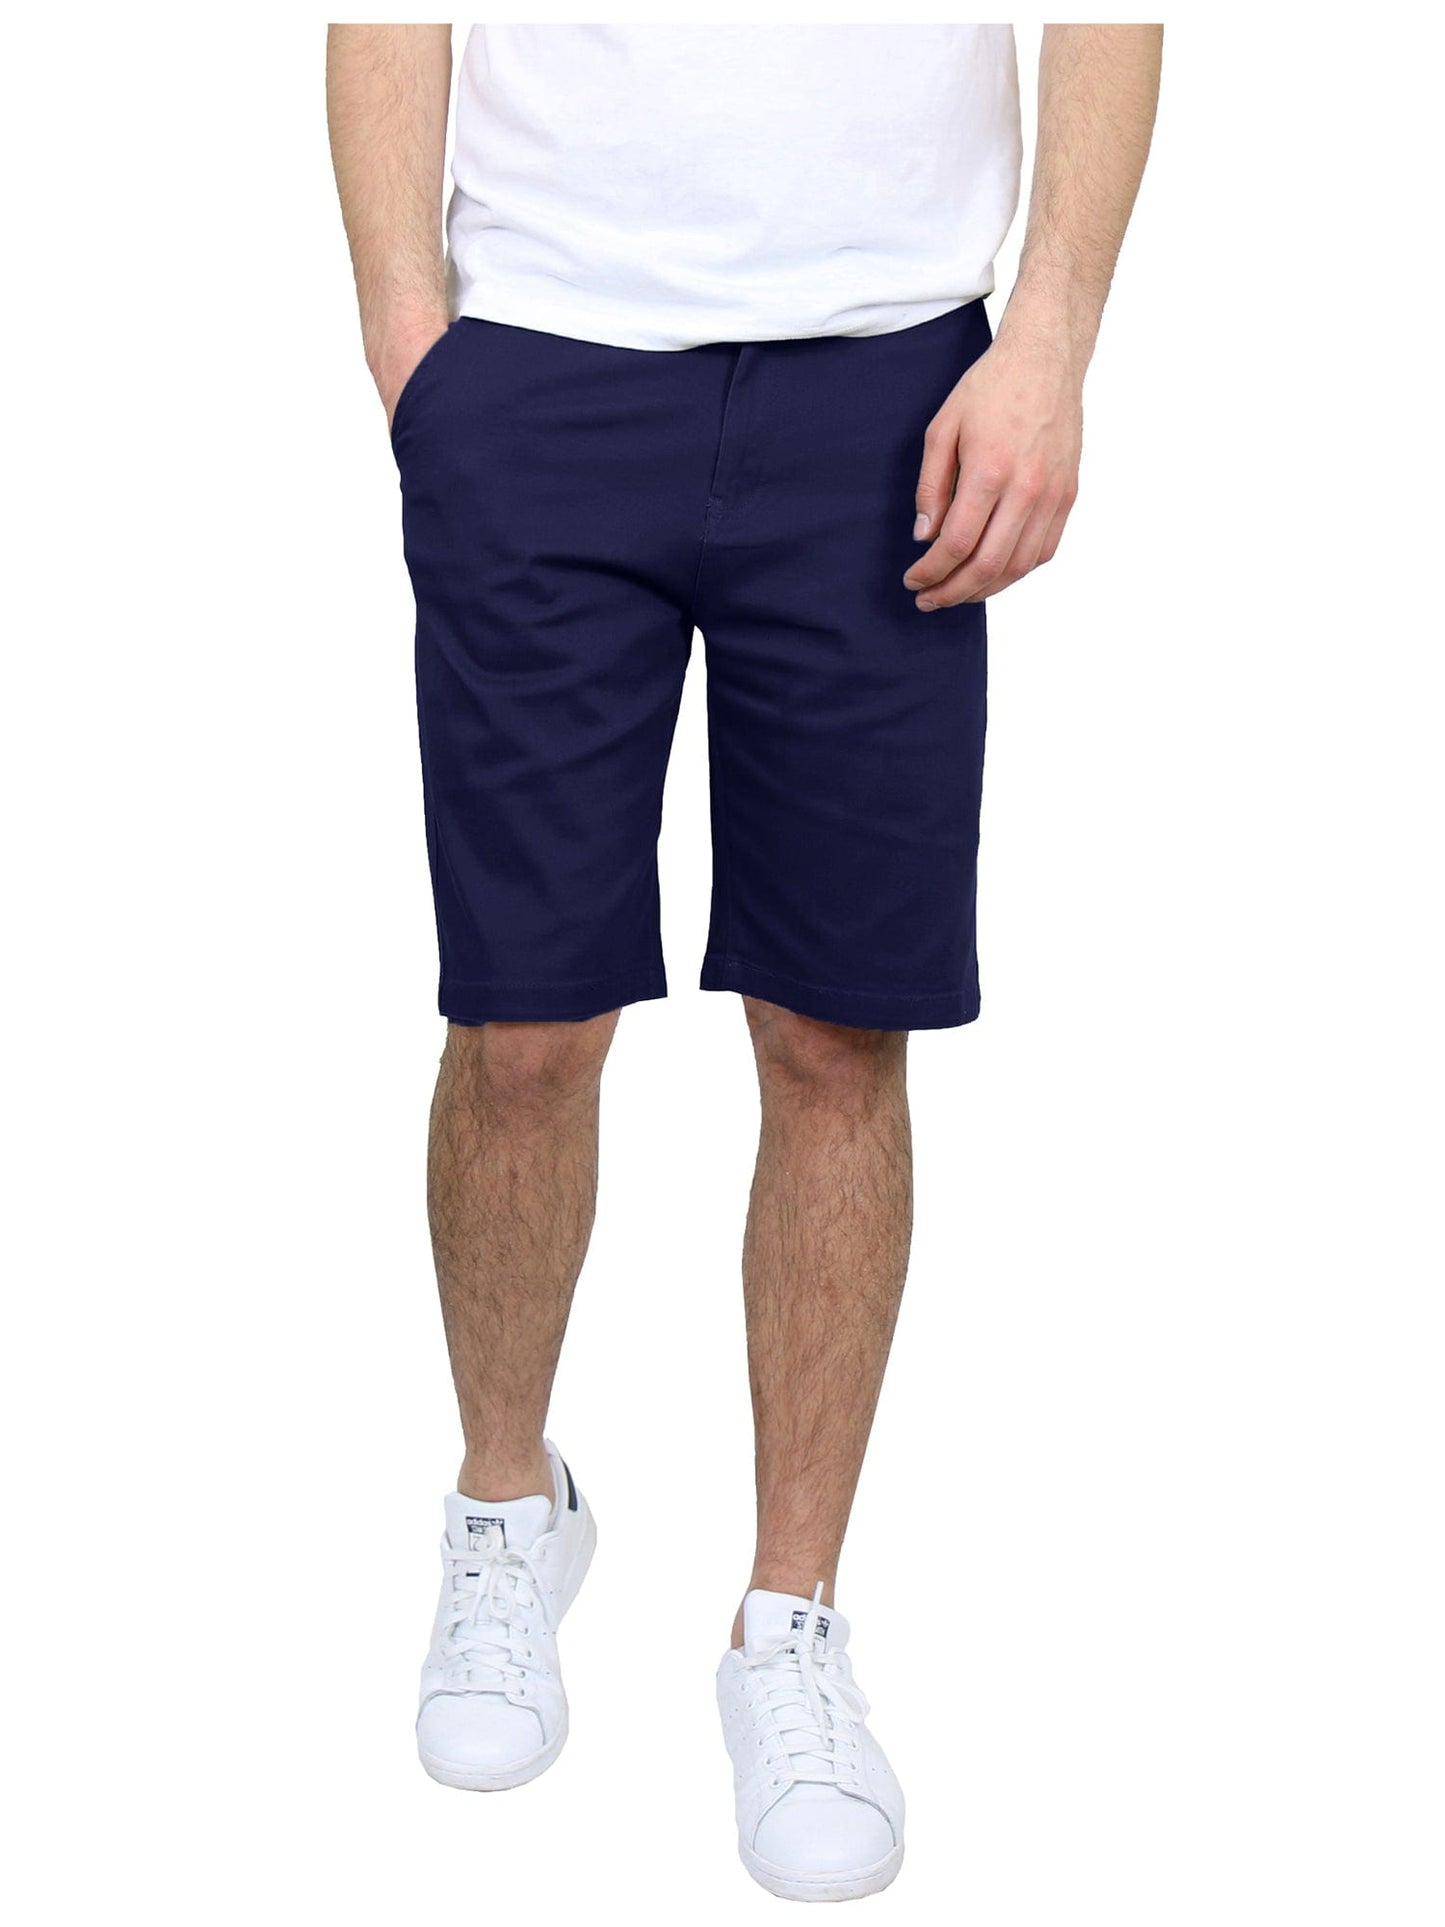 Men's Flat-Front Slim Fit Cotton Stretch Chino Shorts (Sizes, 30-42)